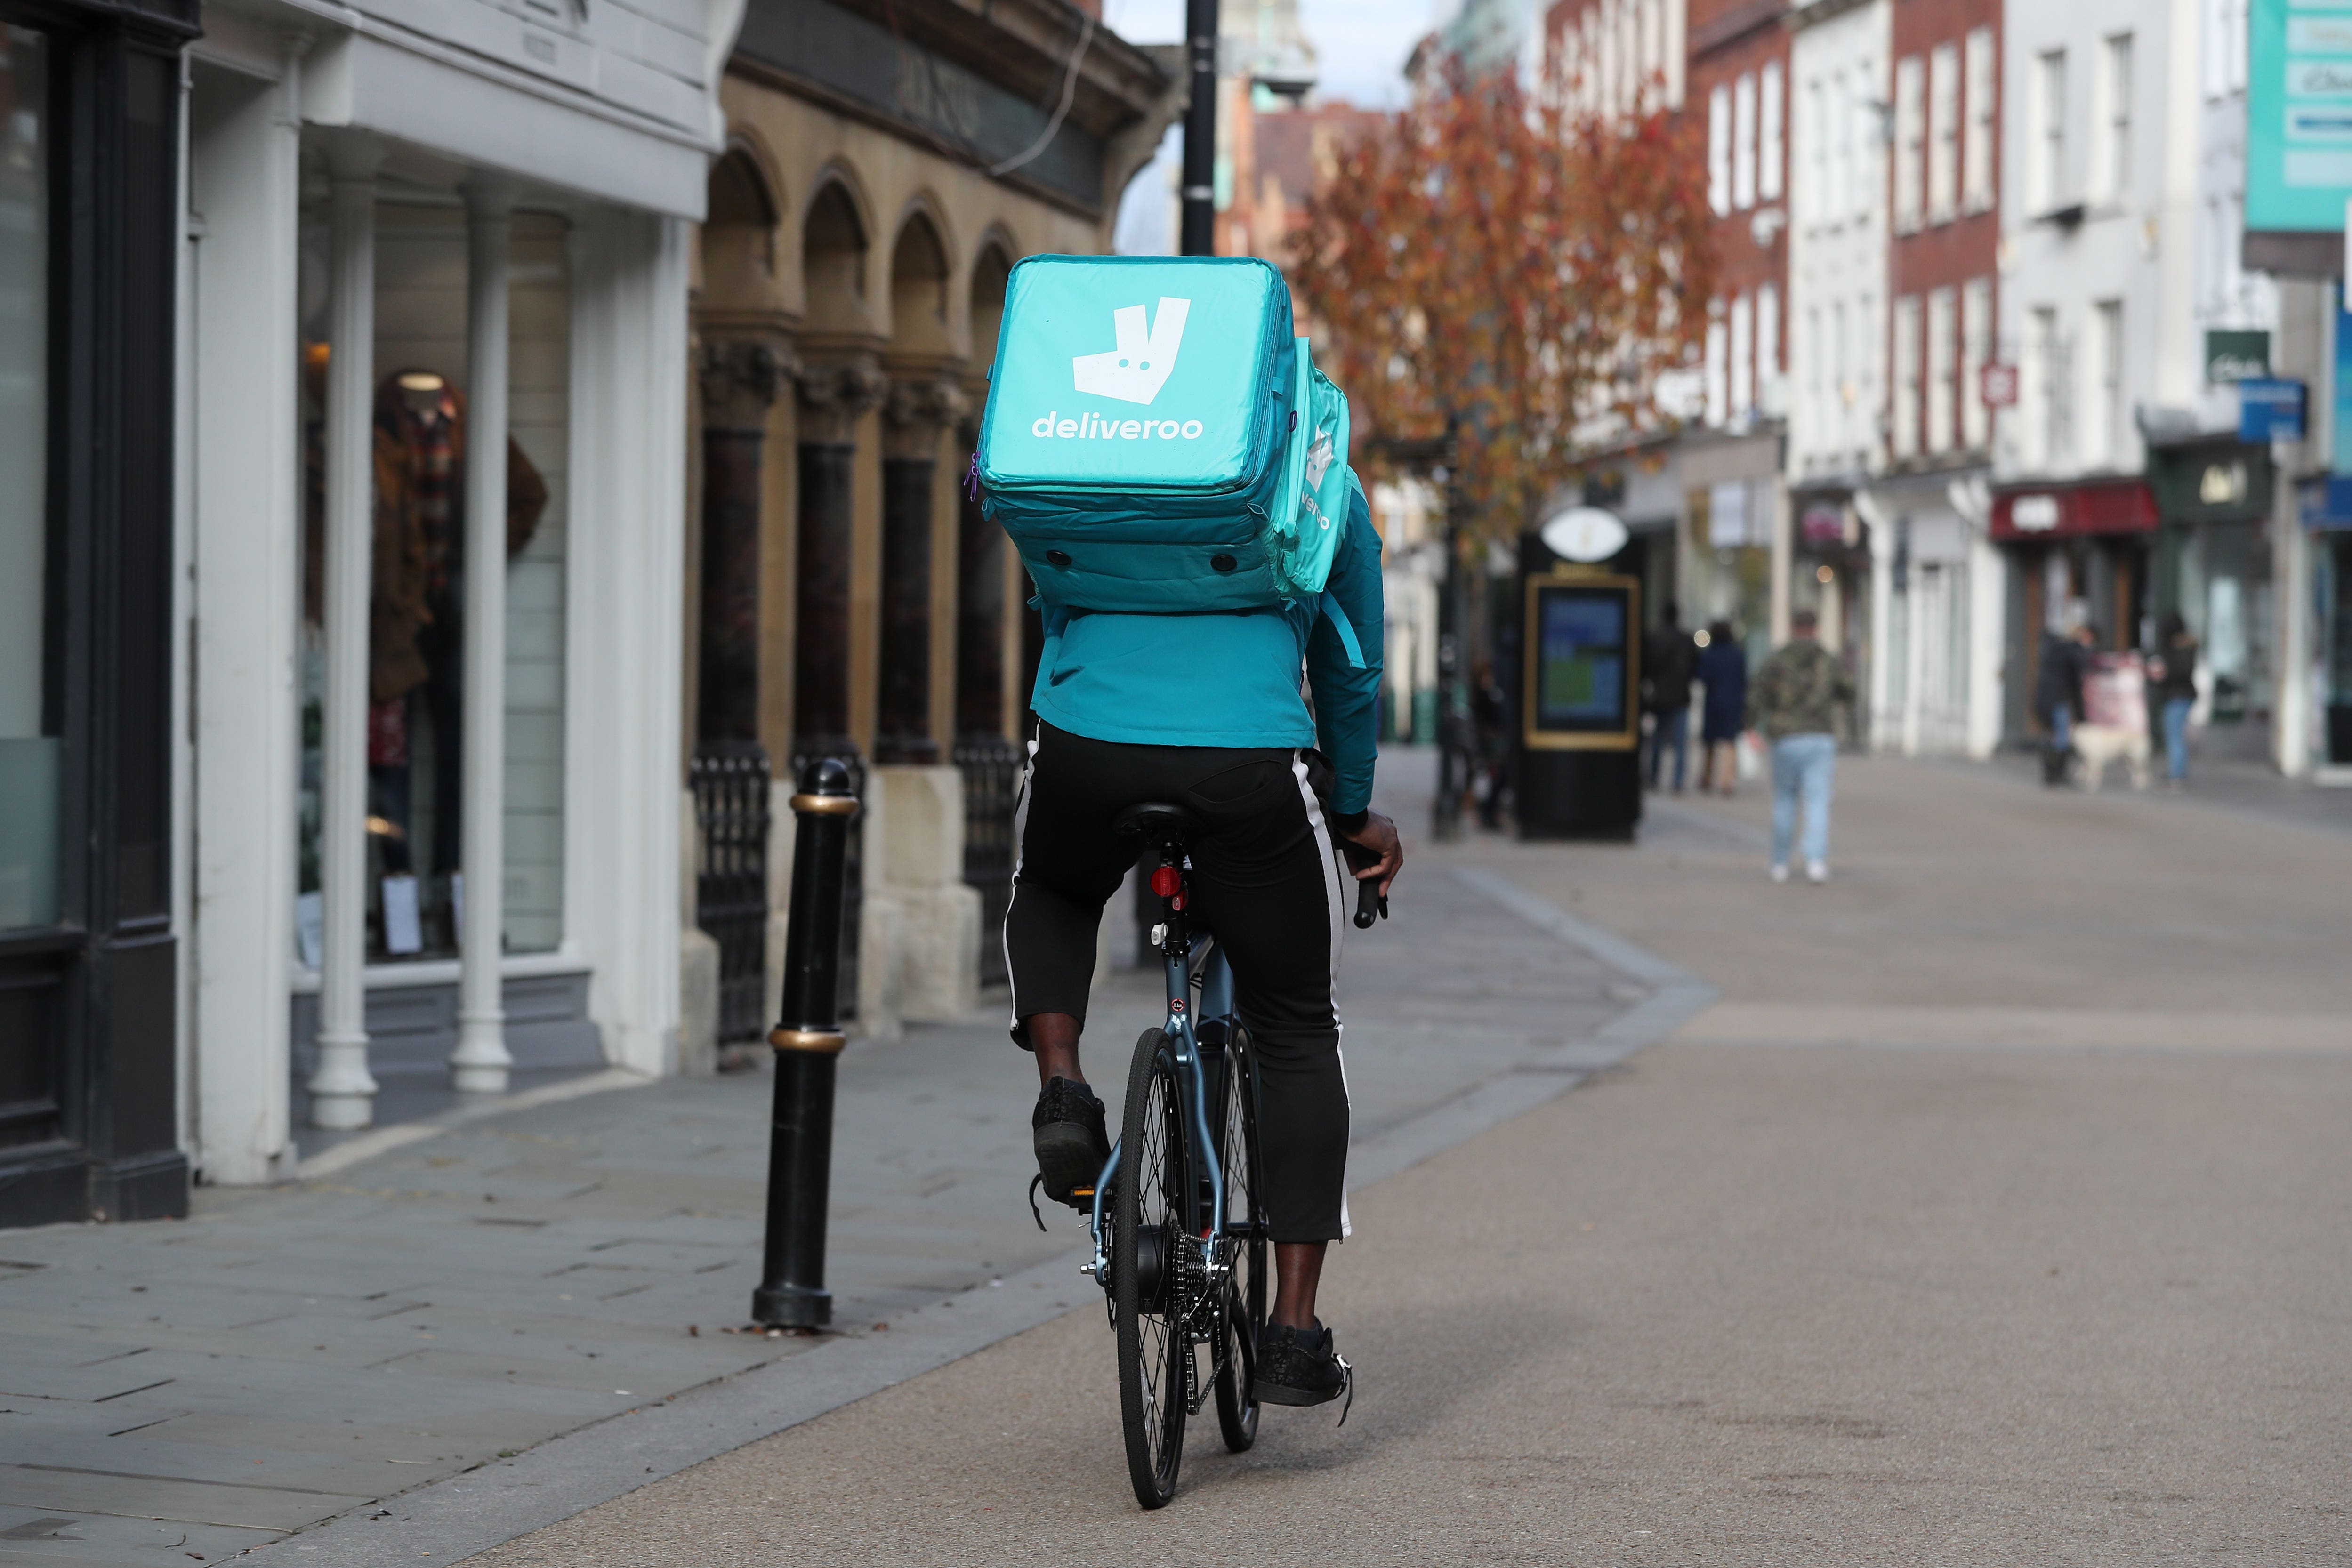 Takeaway delivery firm Deliveroo has posted a £245.6 million loss for the past year (David Davies/PA)